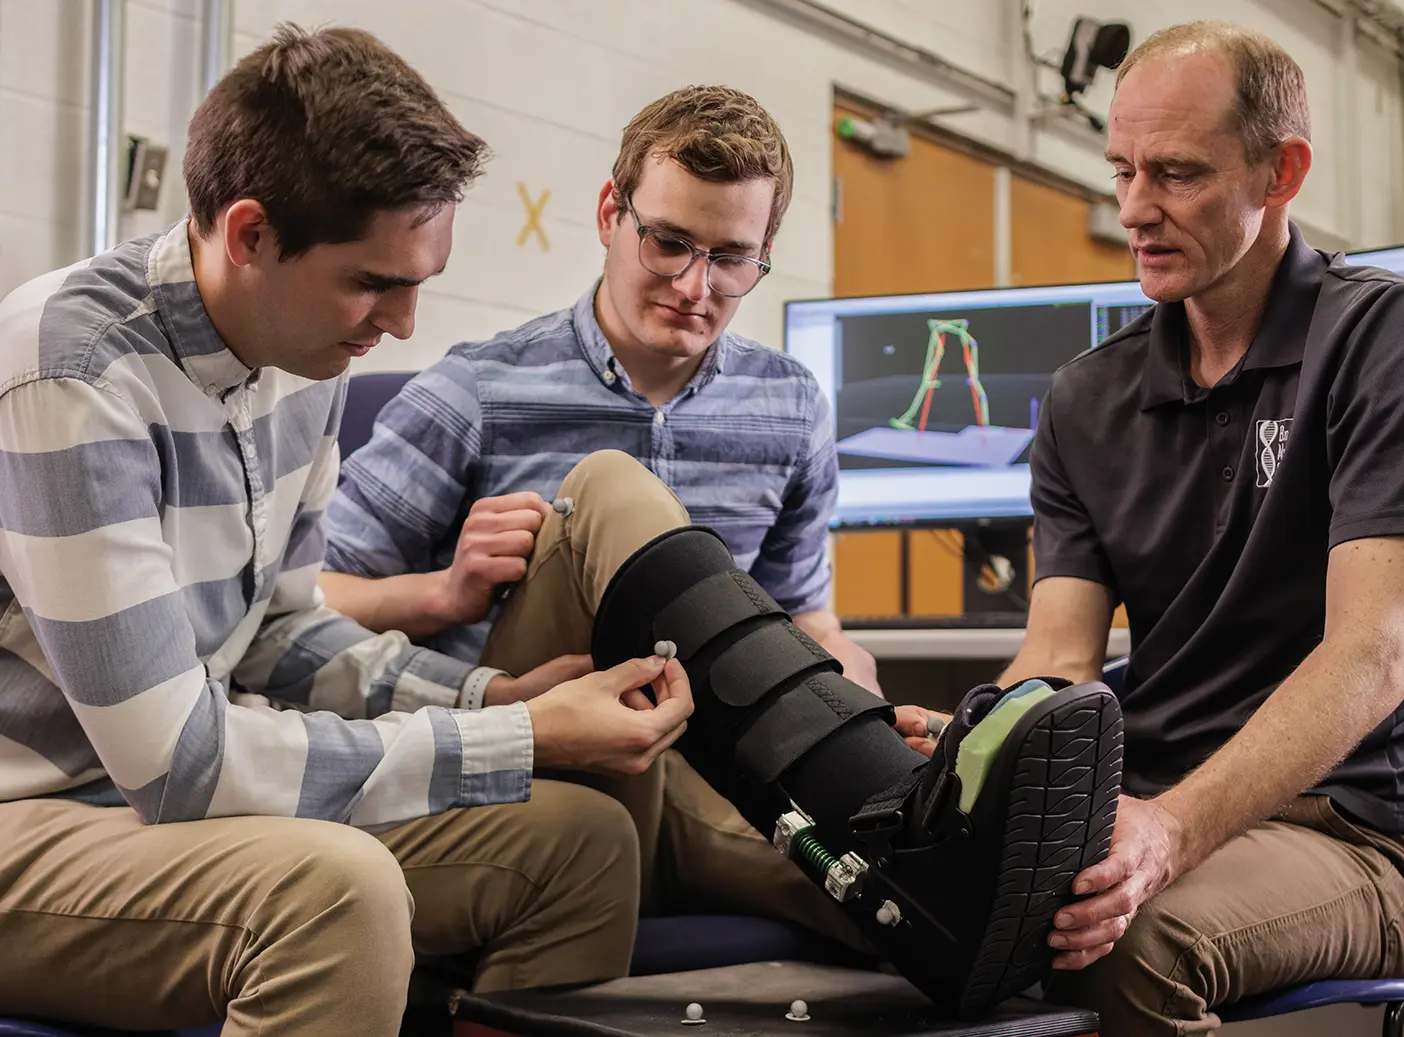 Three men in an engineering lab examine a medical boot by placing nodes on it.